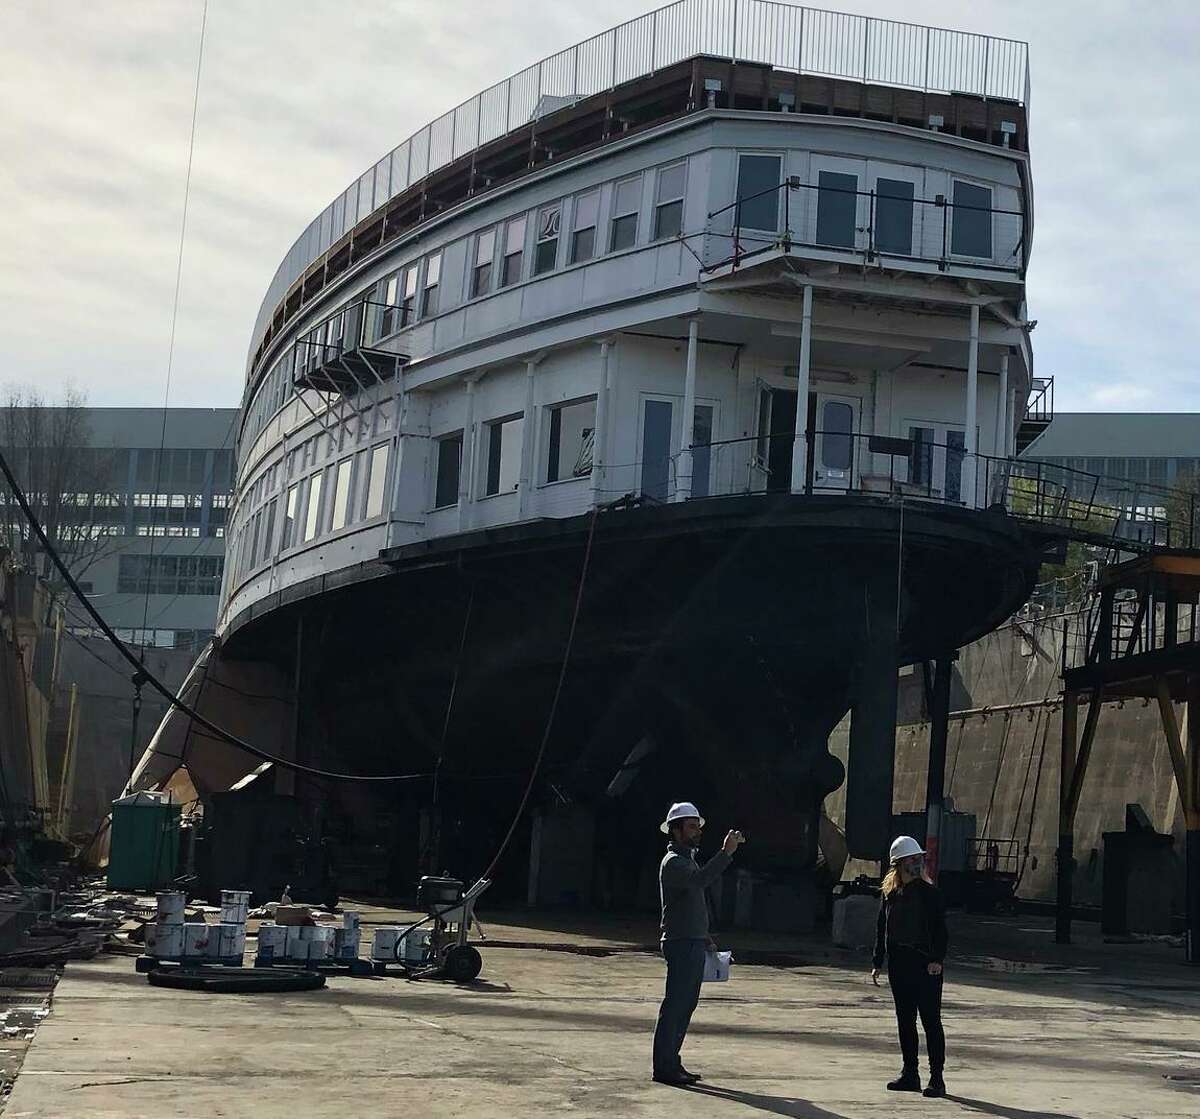 The ferry Klamath is being renovated at a dry dock at Mare Island. It will find new life as the waterfront offices of the influential Bay Area Council.